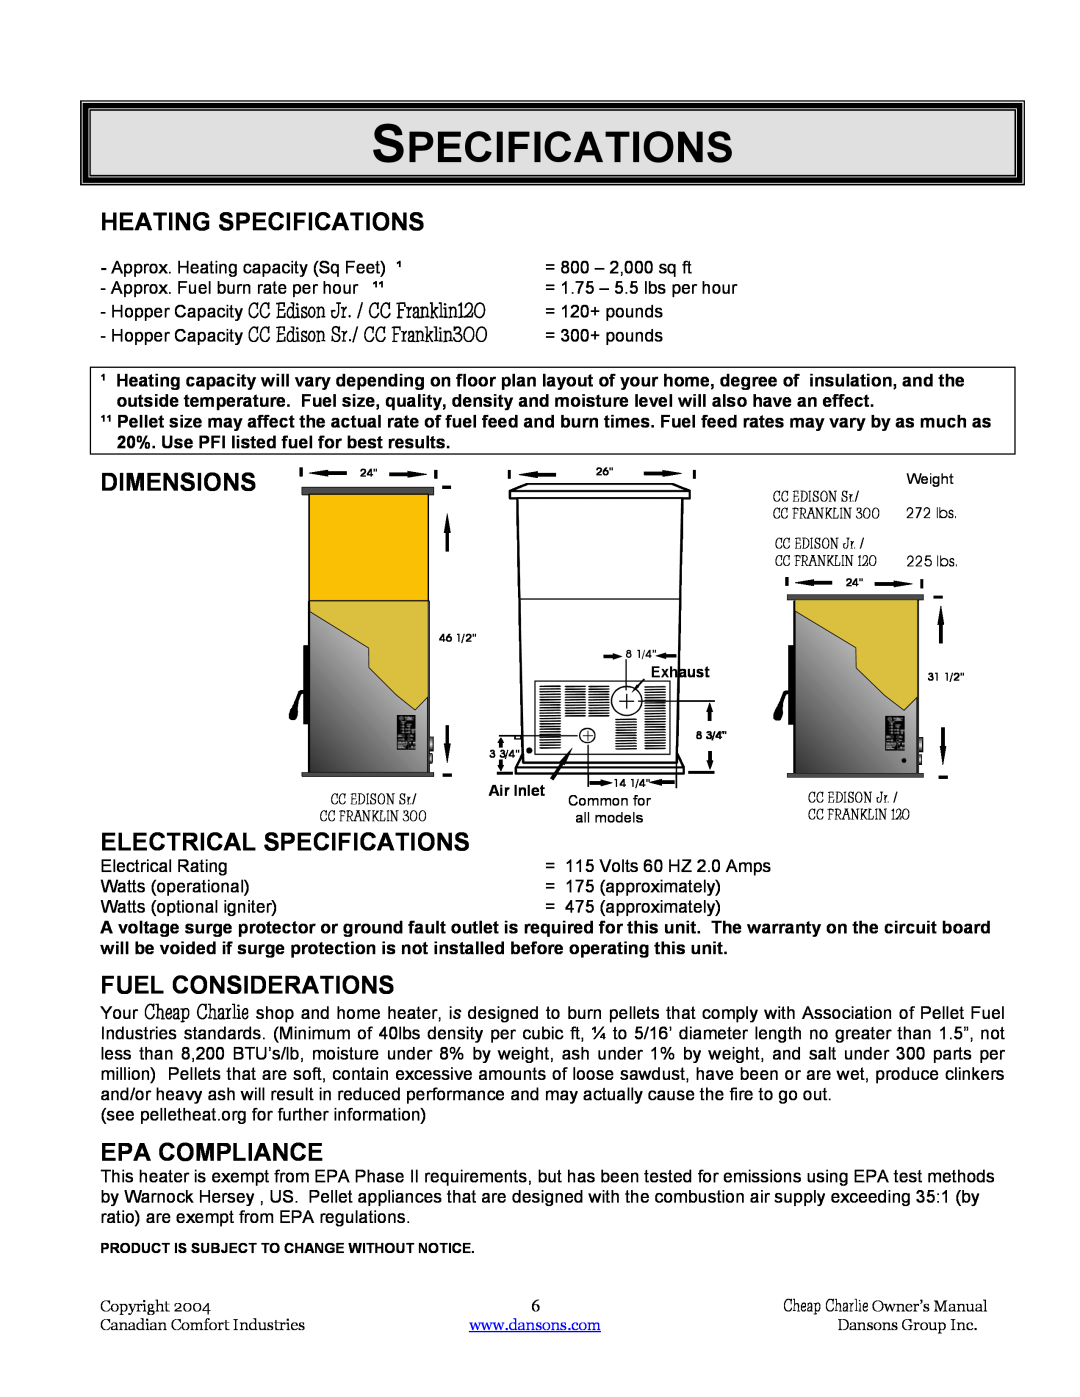 Dansons Group HCF300, HCF120, HCS Heating Specifications, Dimensions, Electrical Specifications, Fuel Considerations 